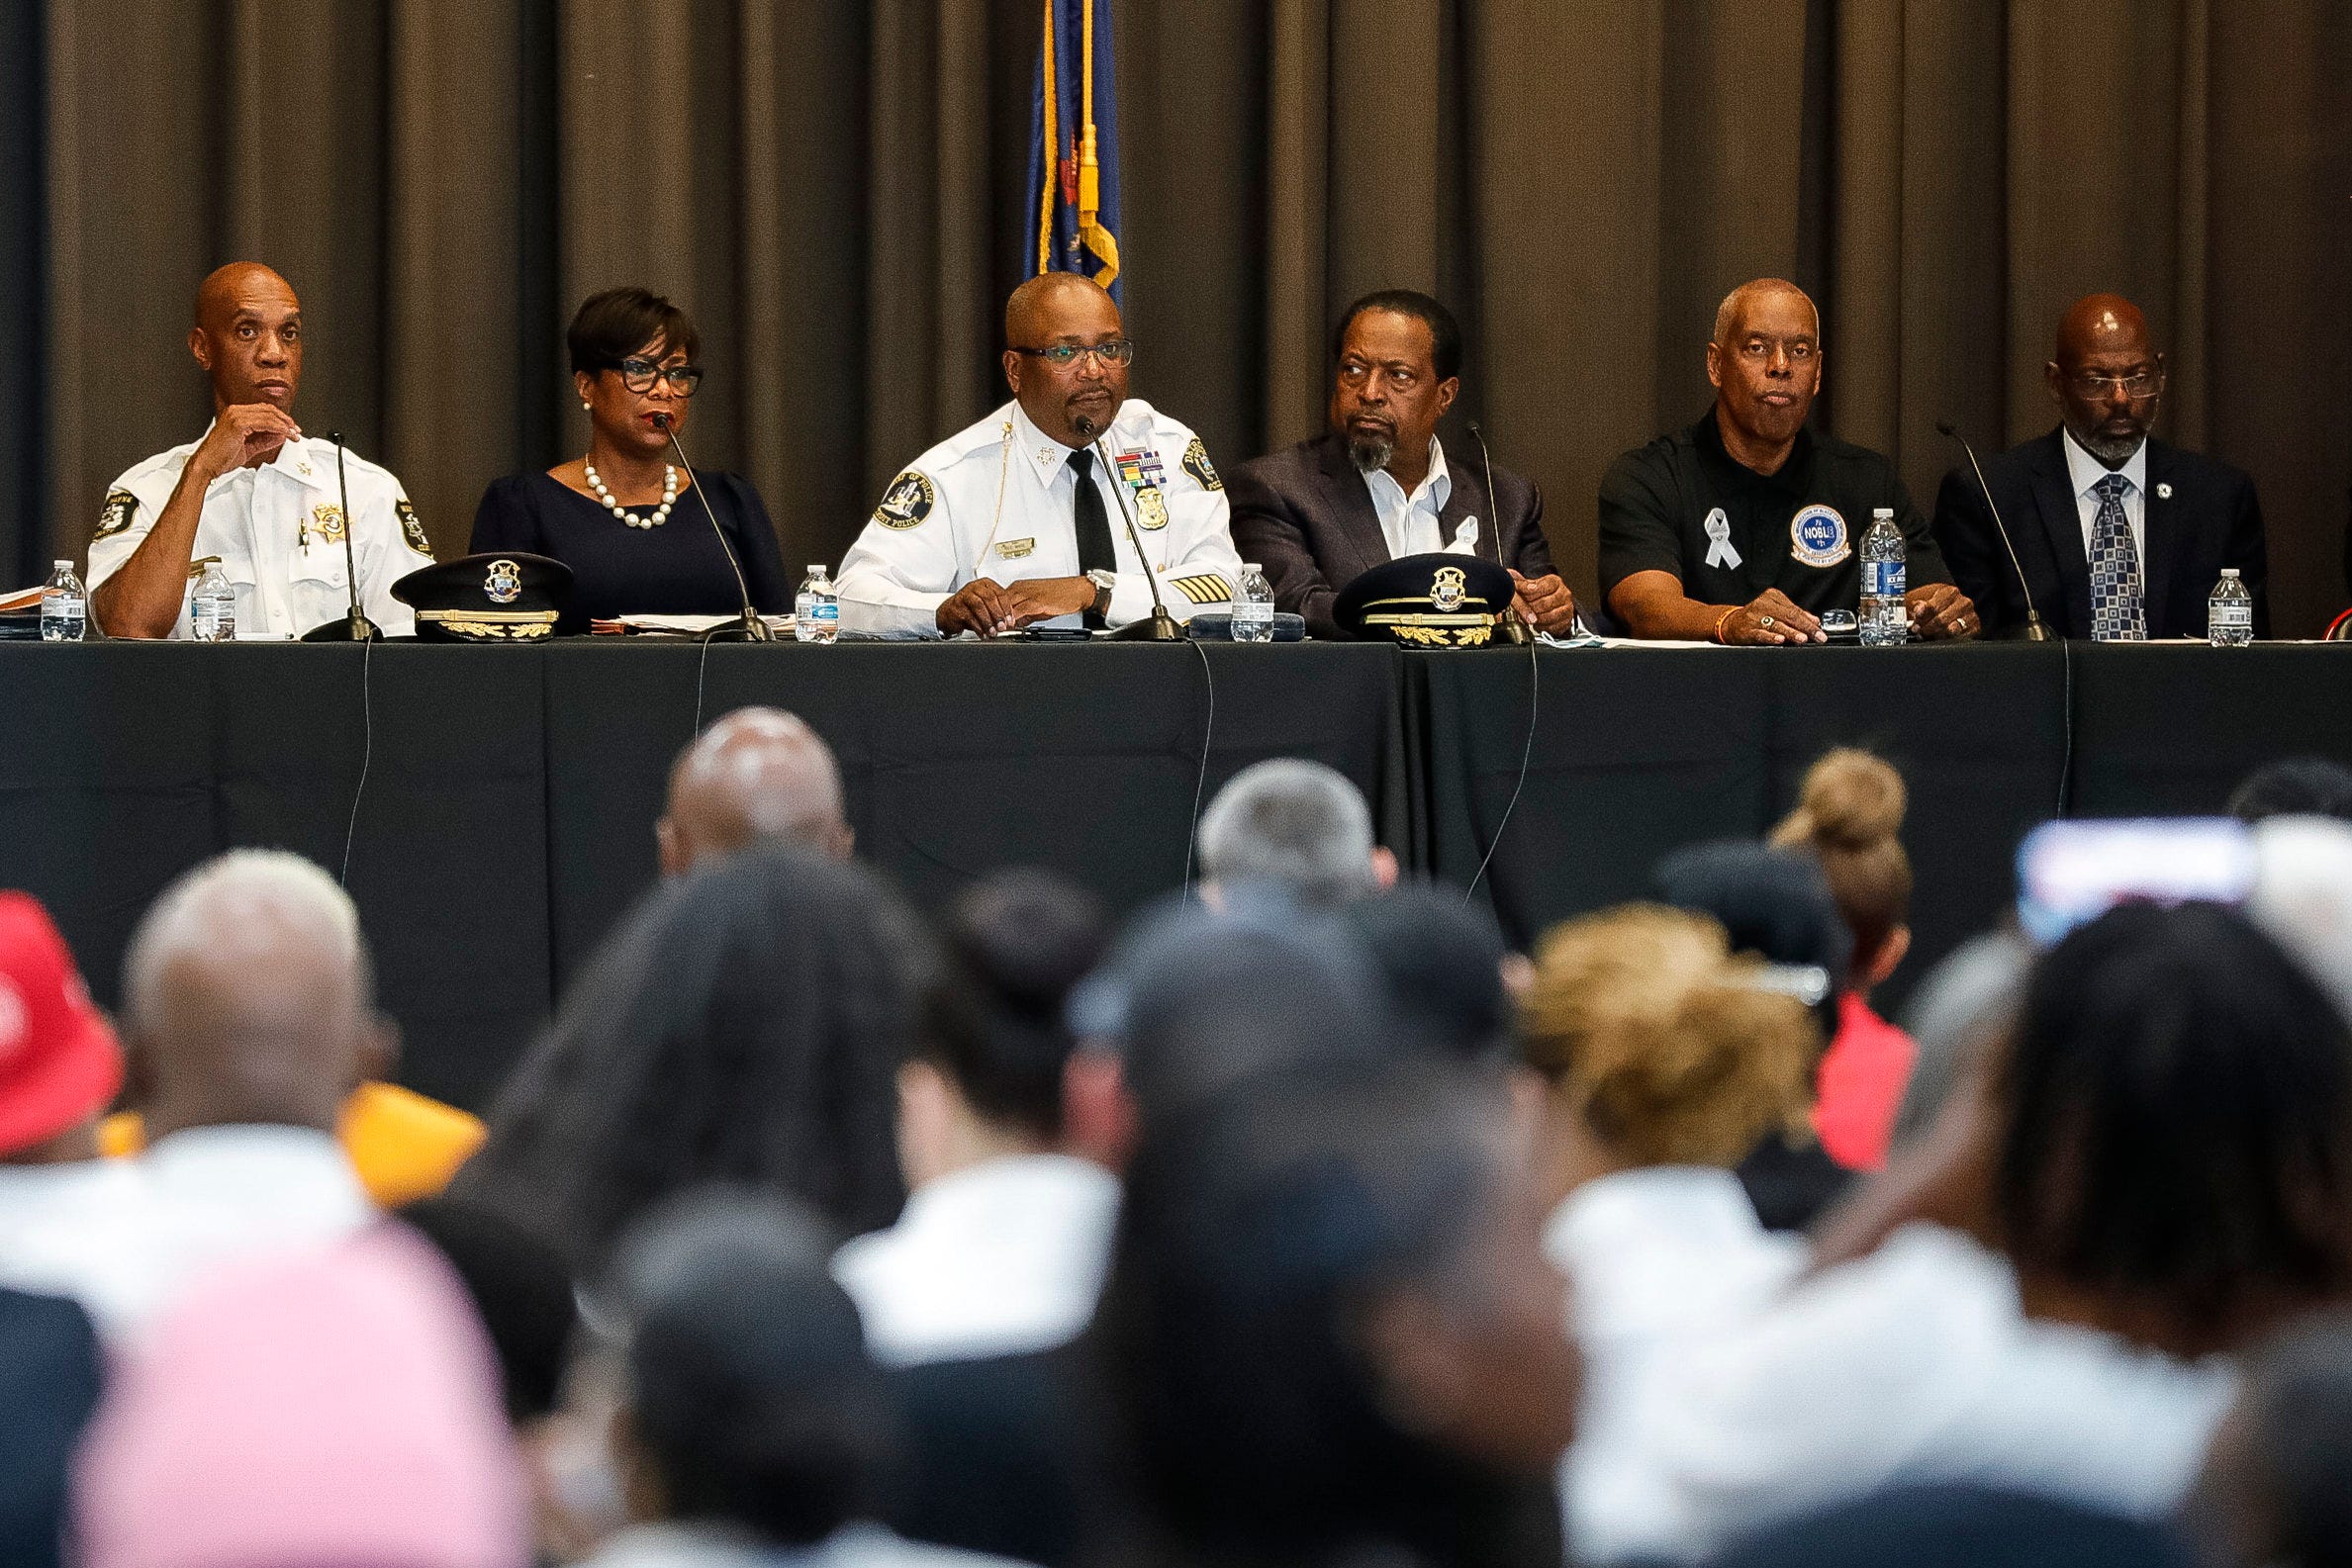 Detroit Police Chief James White speaks during a town hall meeting at the cafeteria of Detroit Edison Public School Academy in Detroit on Thursday, Sept. 22, 2022.
(Photo: Junfu Han, Detroit Free Press)